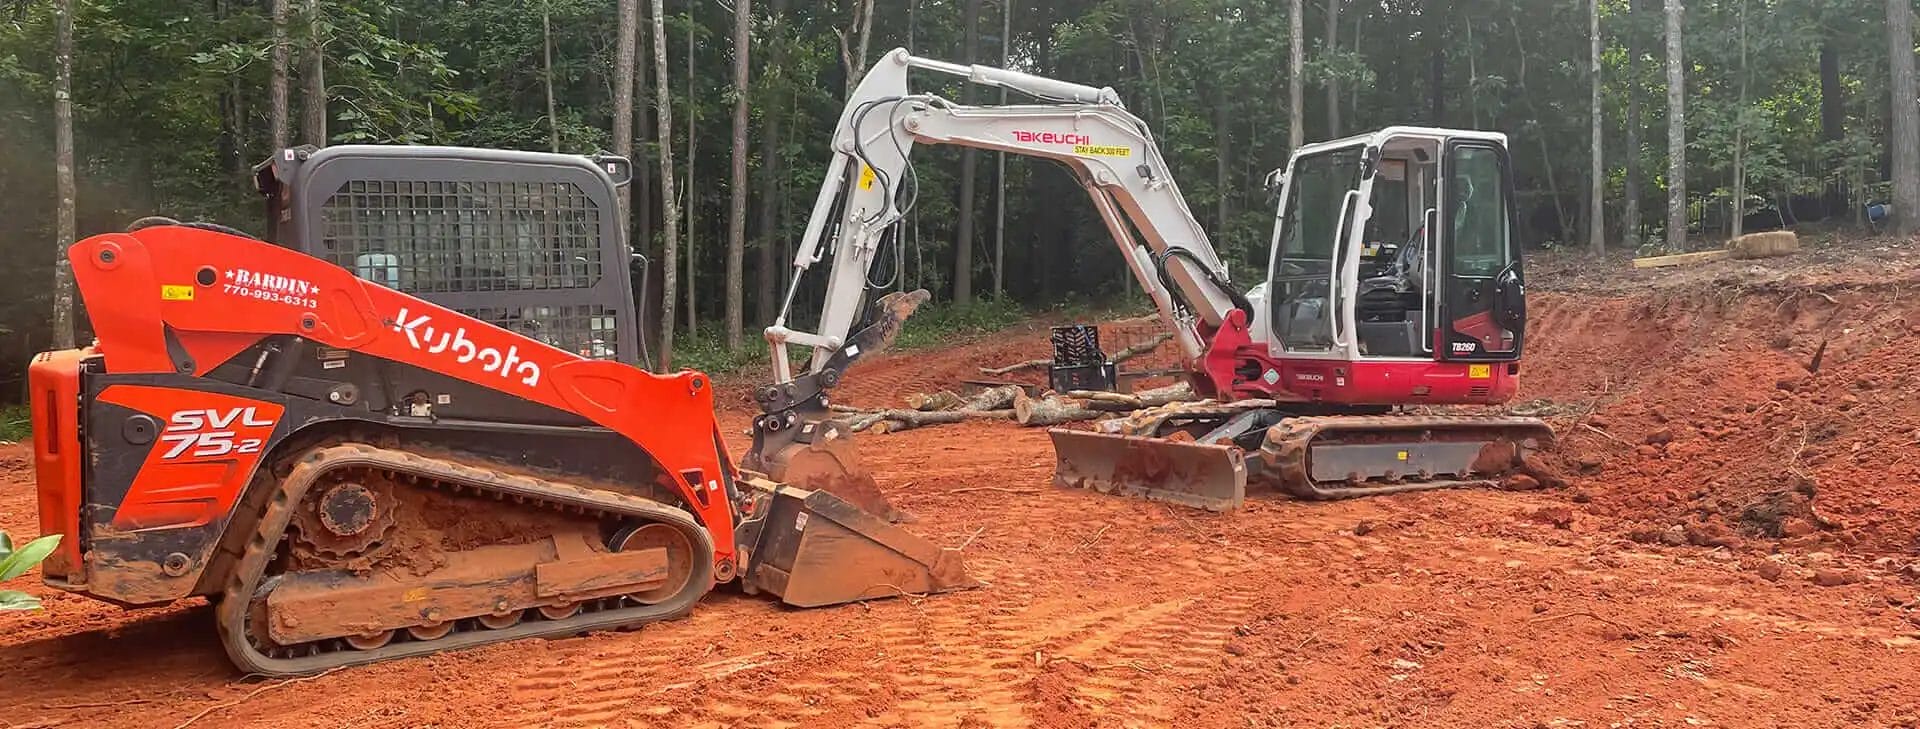 We Offer More Than 30 Years of Experience <br />
Providing Excavation Services and Expertise